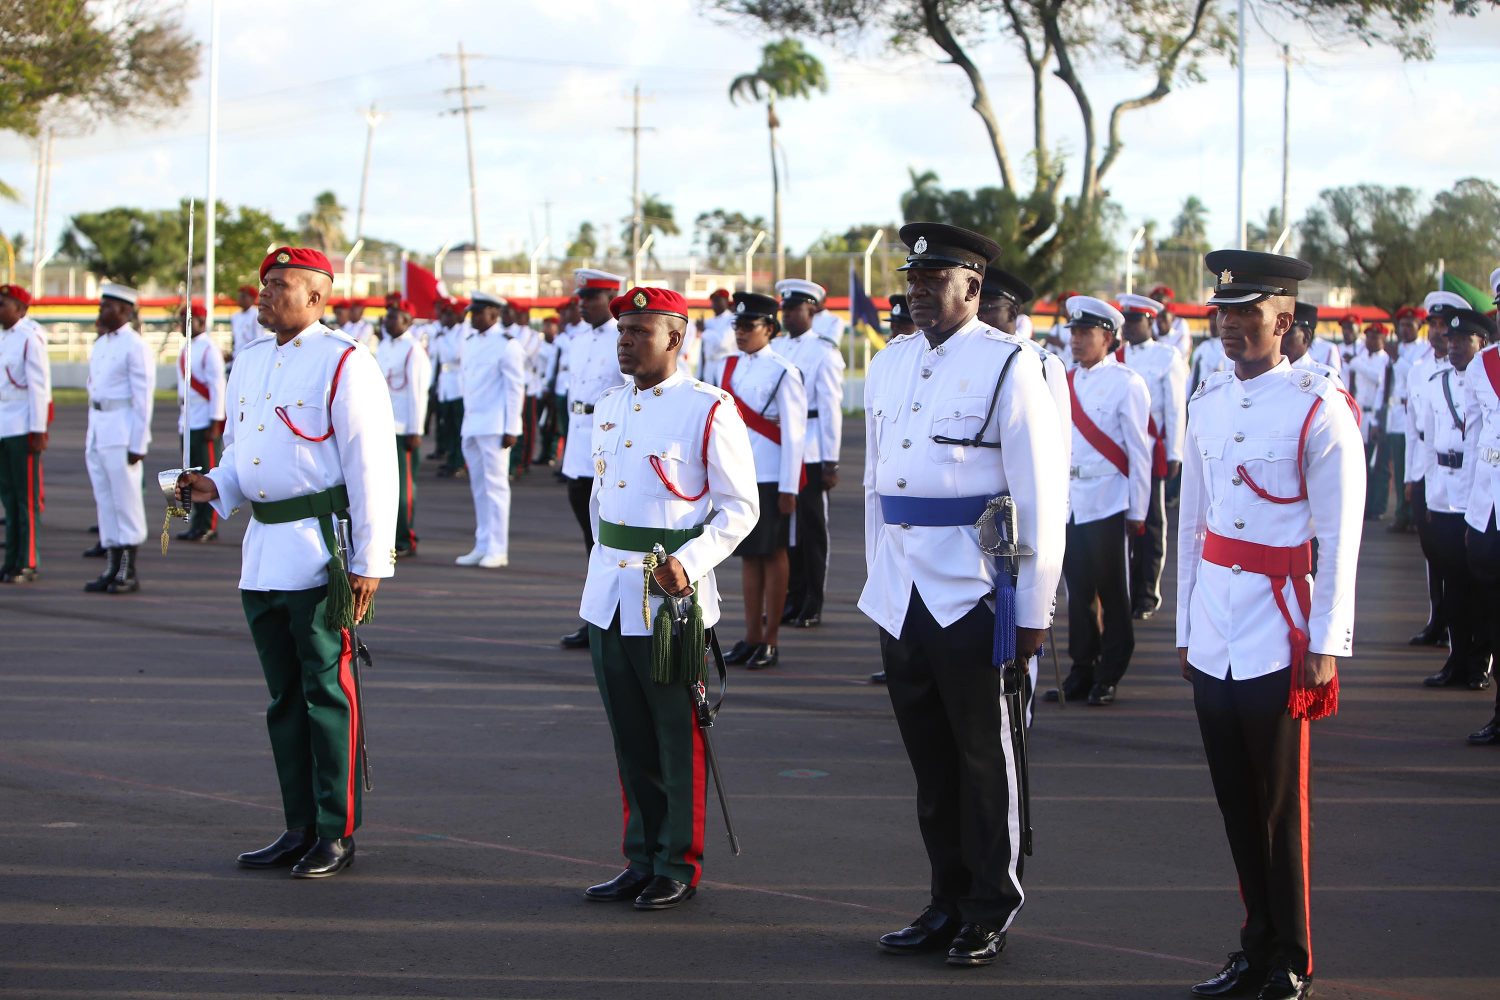 A section of the awardees at yesterday’s Joint Services Medal Presentation Parade 